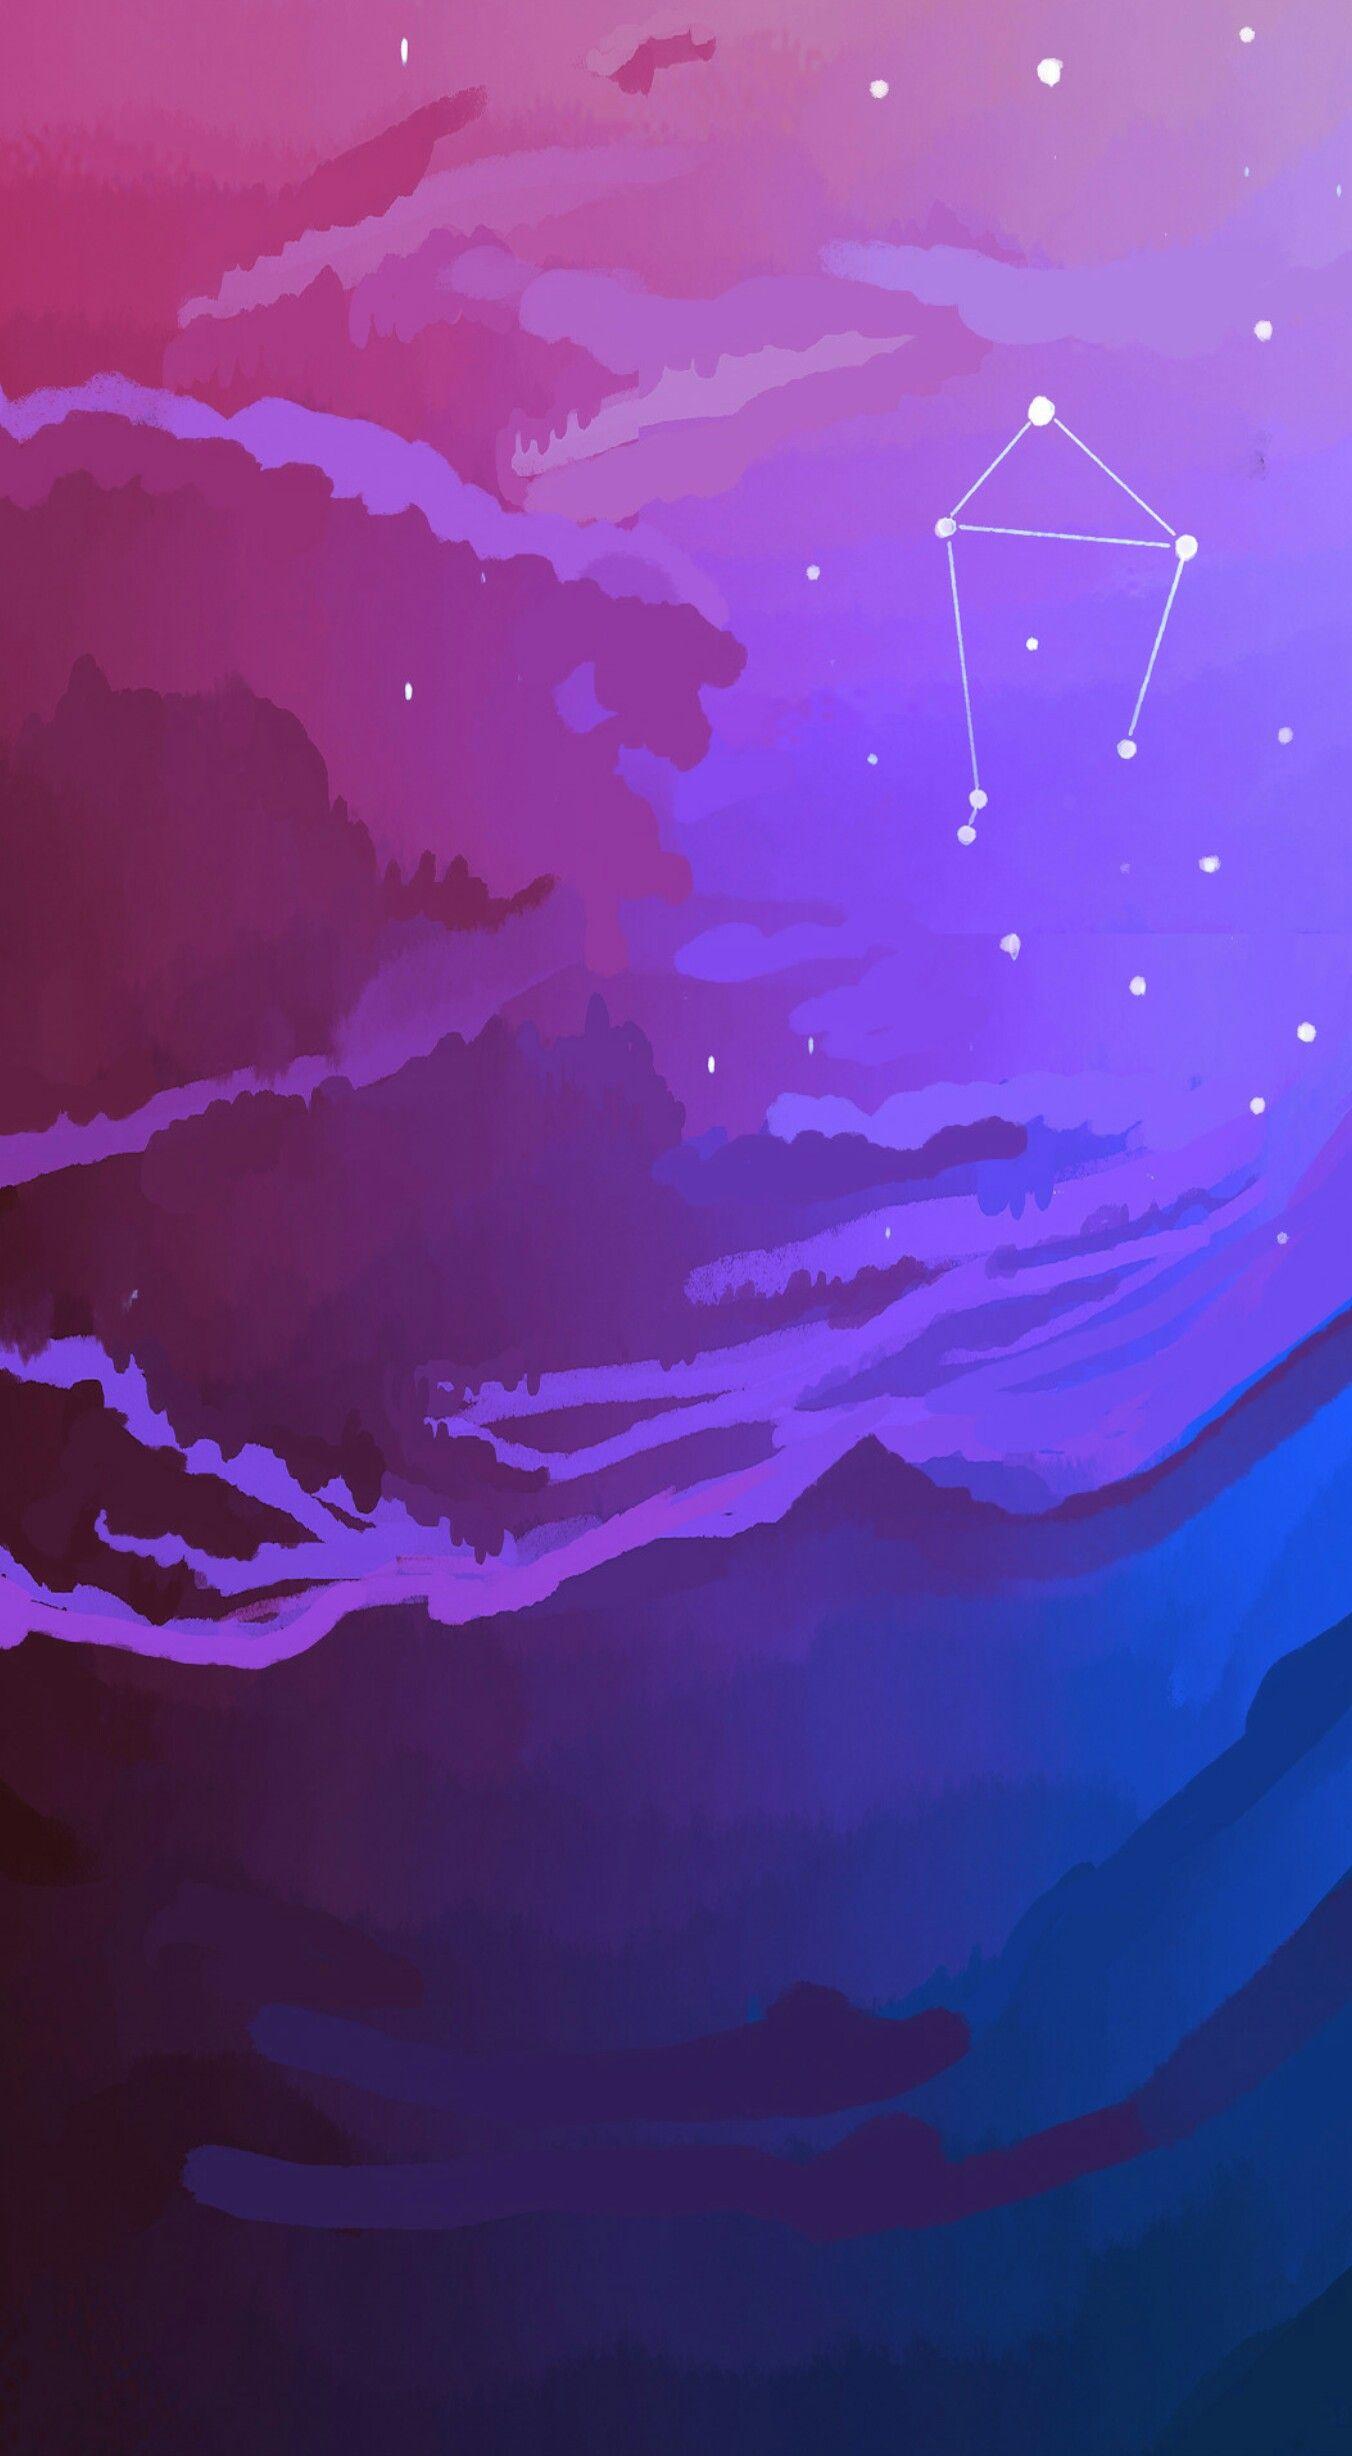 IPhone wallpaper of a purple and blue gradient sky with a constellation of stars - Abstract, Libra, constellation